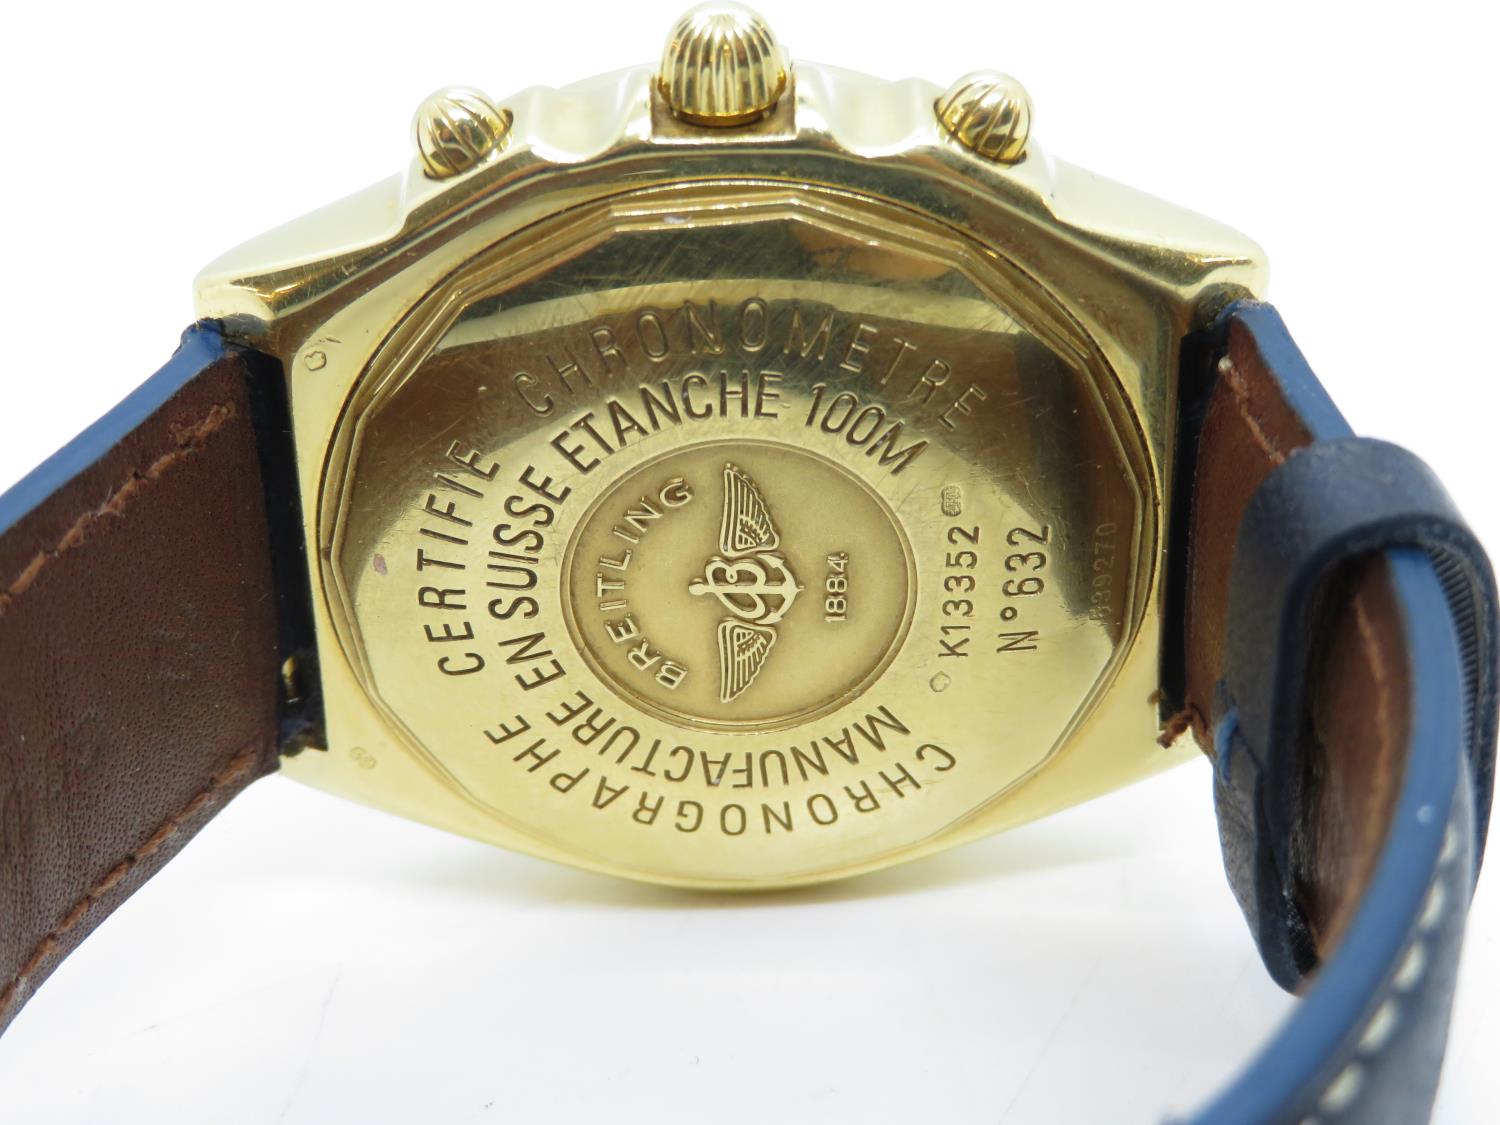 Breitling 18ct gold chronograph fully working automatic watch replacement Breitling strap K13352 - Image 3 of 4